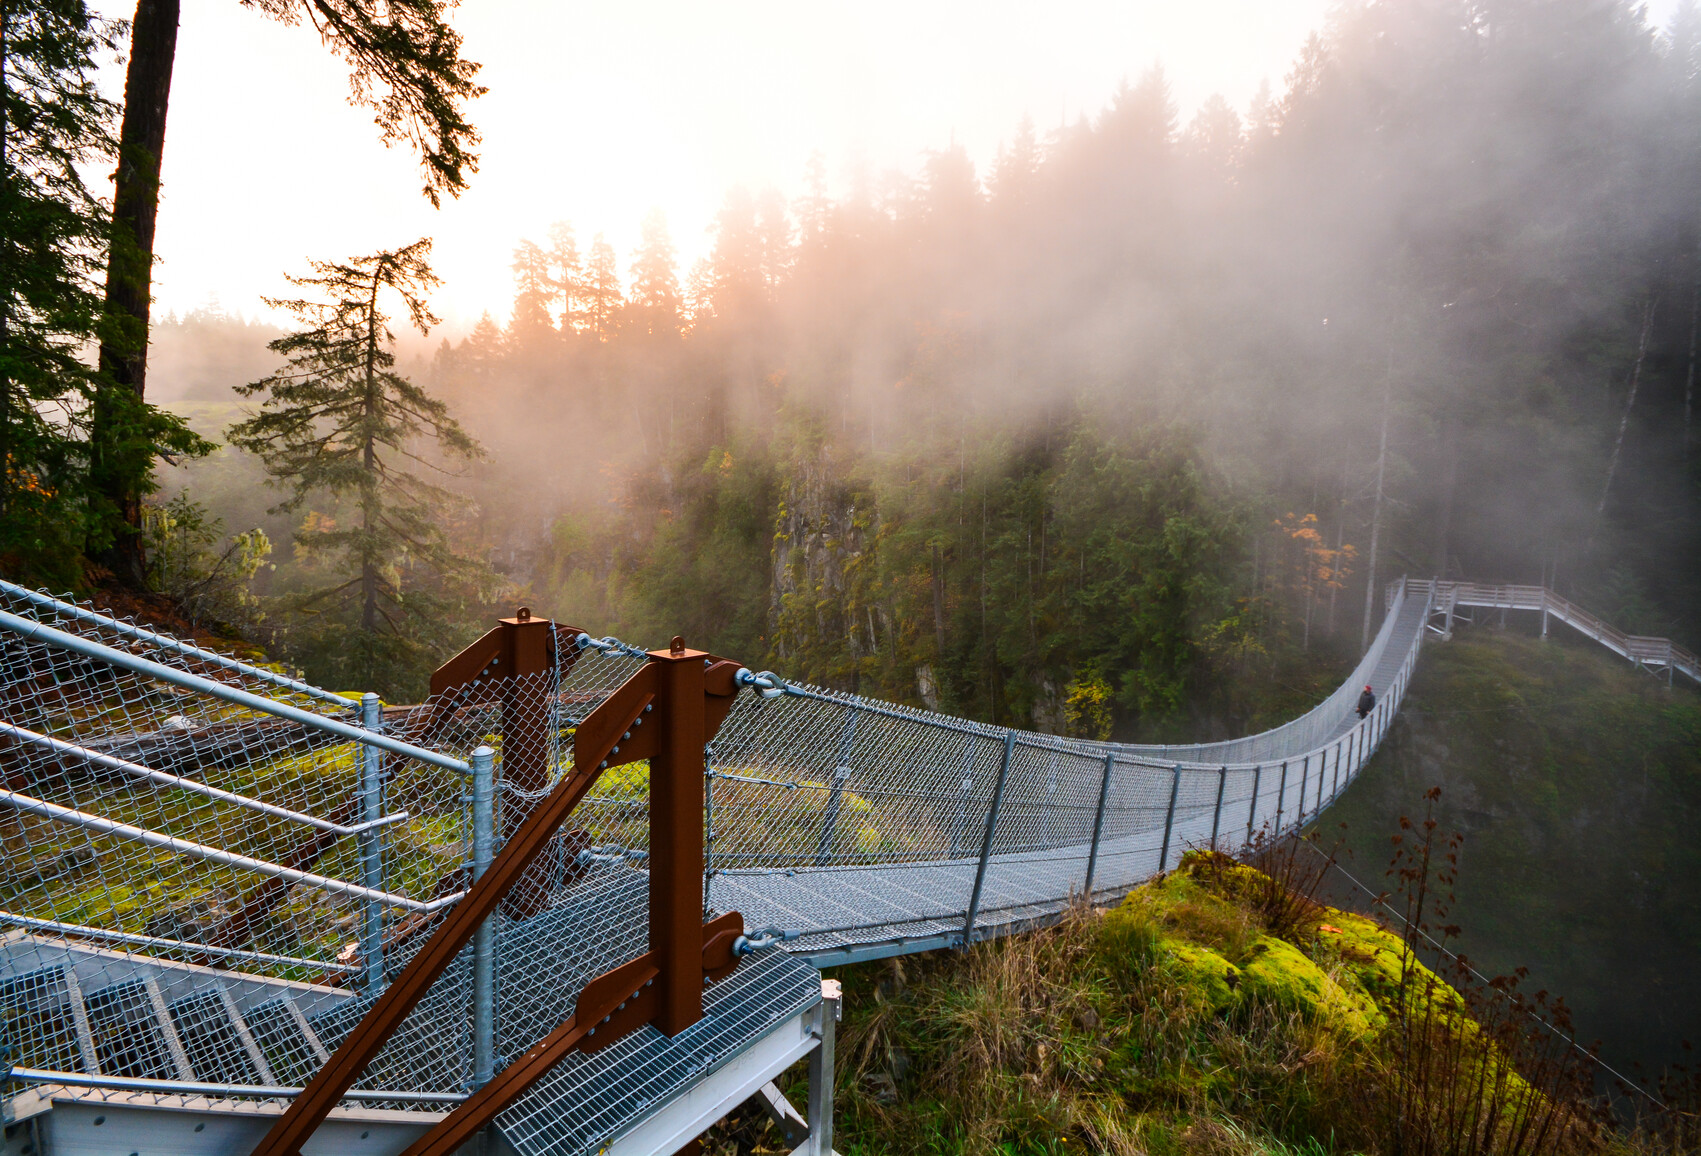 Suspension bridge with visitor crossing. Foggy scene with autumn trees in the forest.